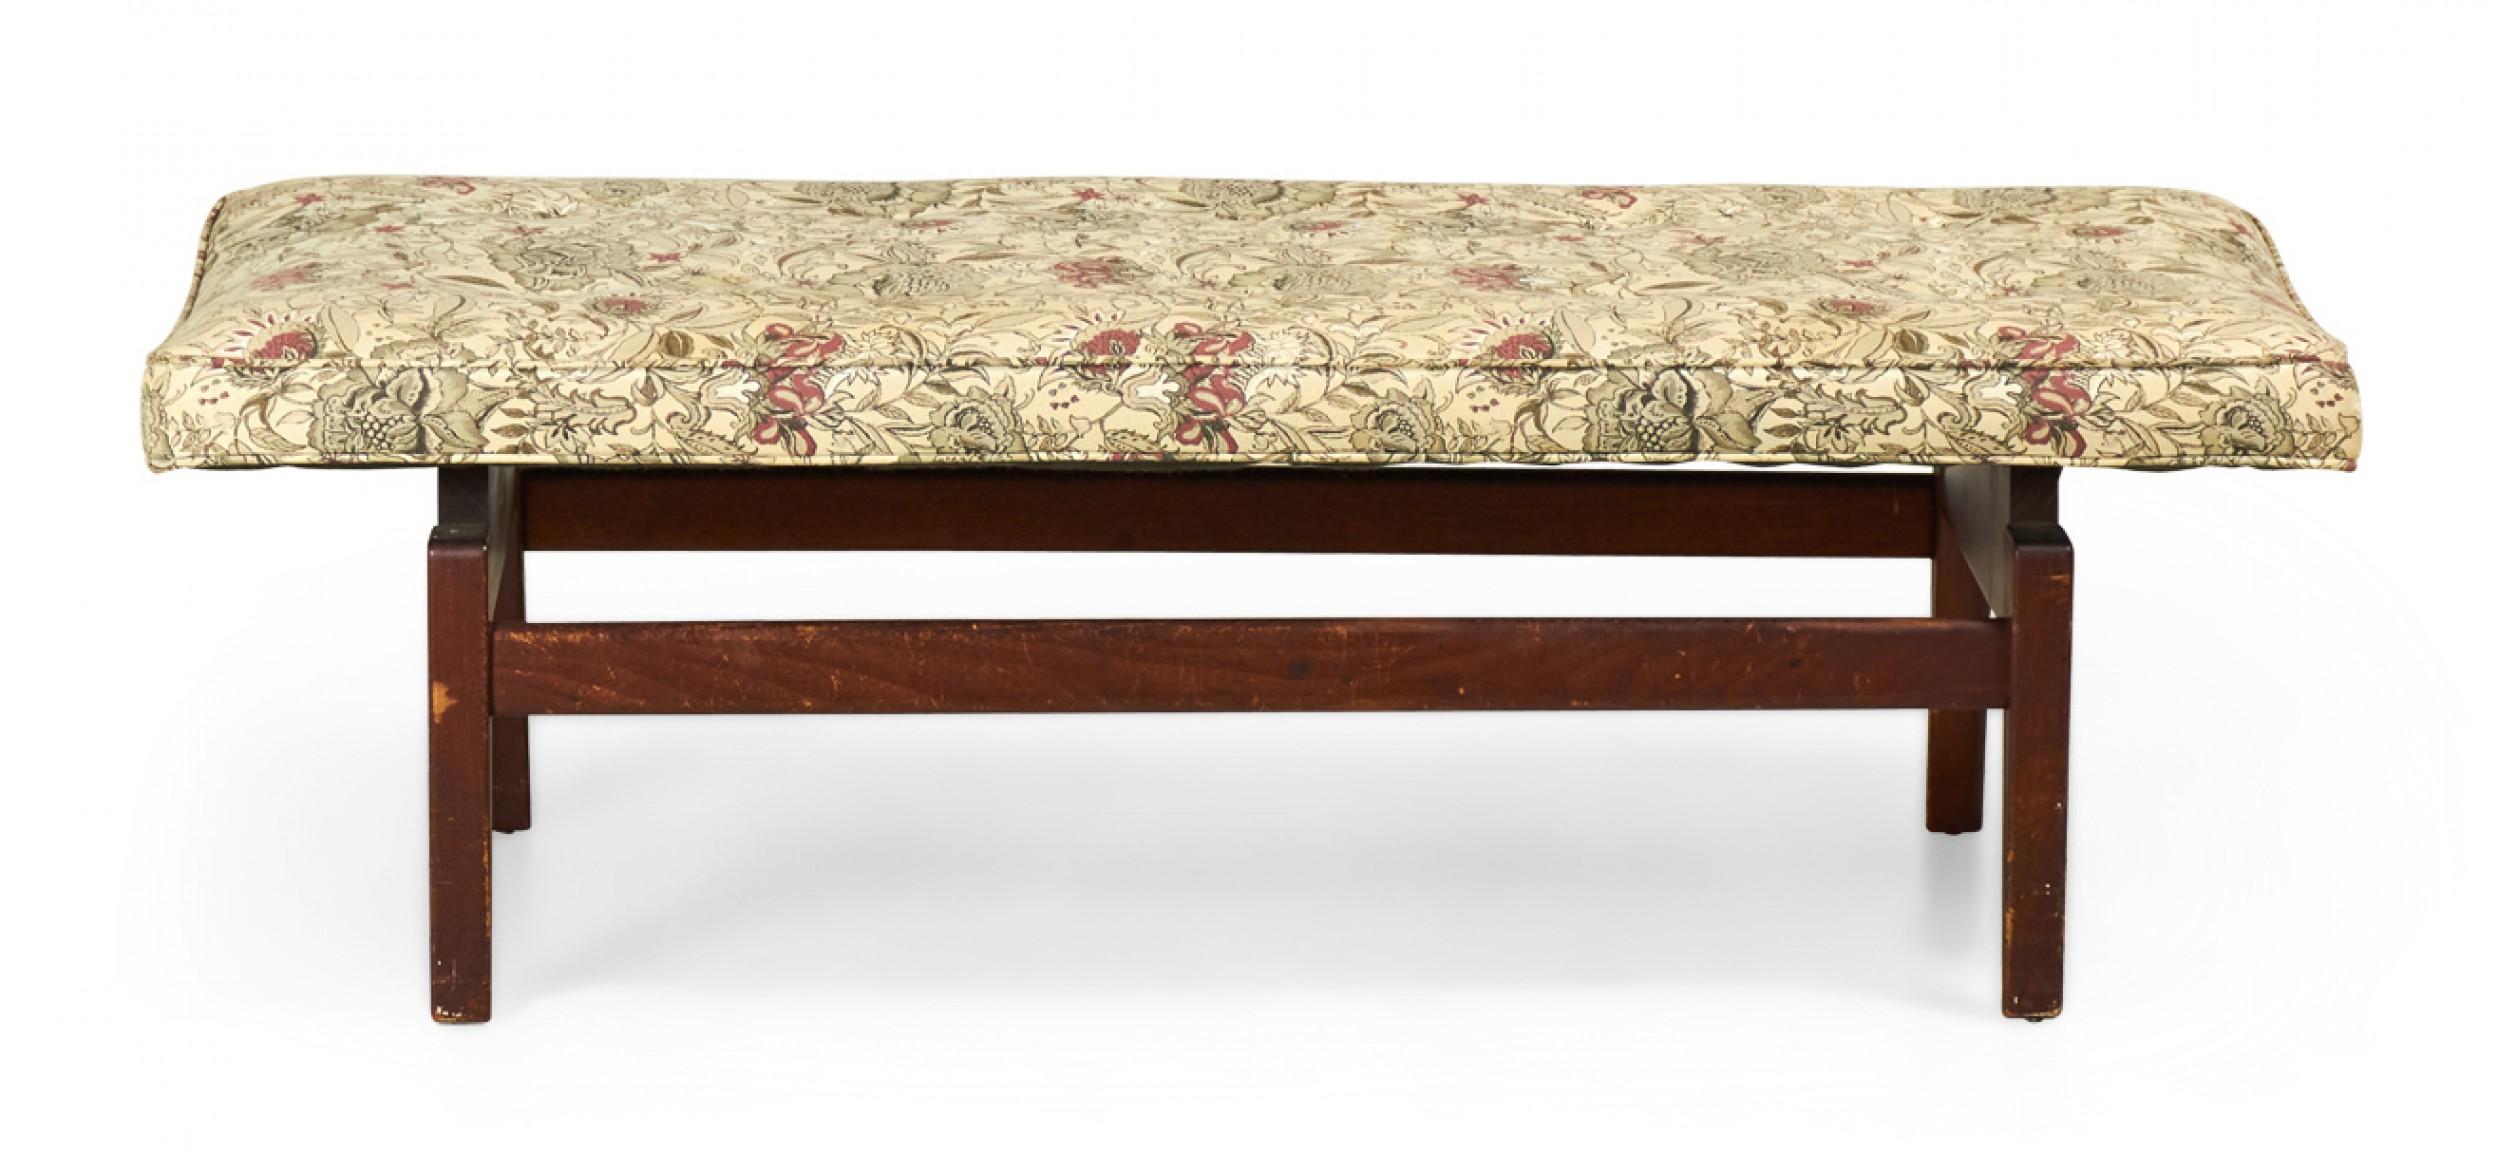 Jens Risom Danish Floating Stained Walnut and Floral Upholstered Bench For Sale 2